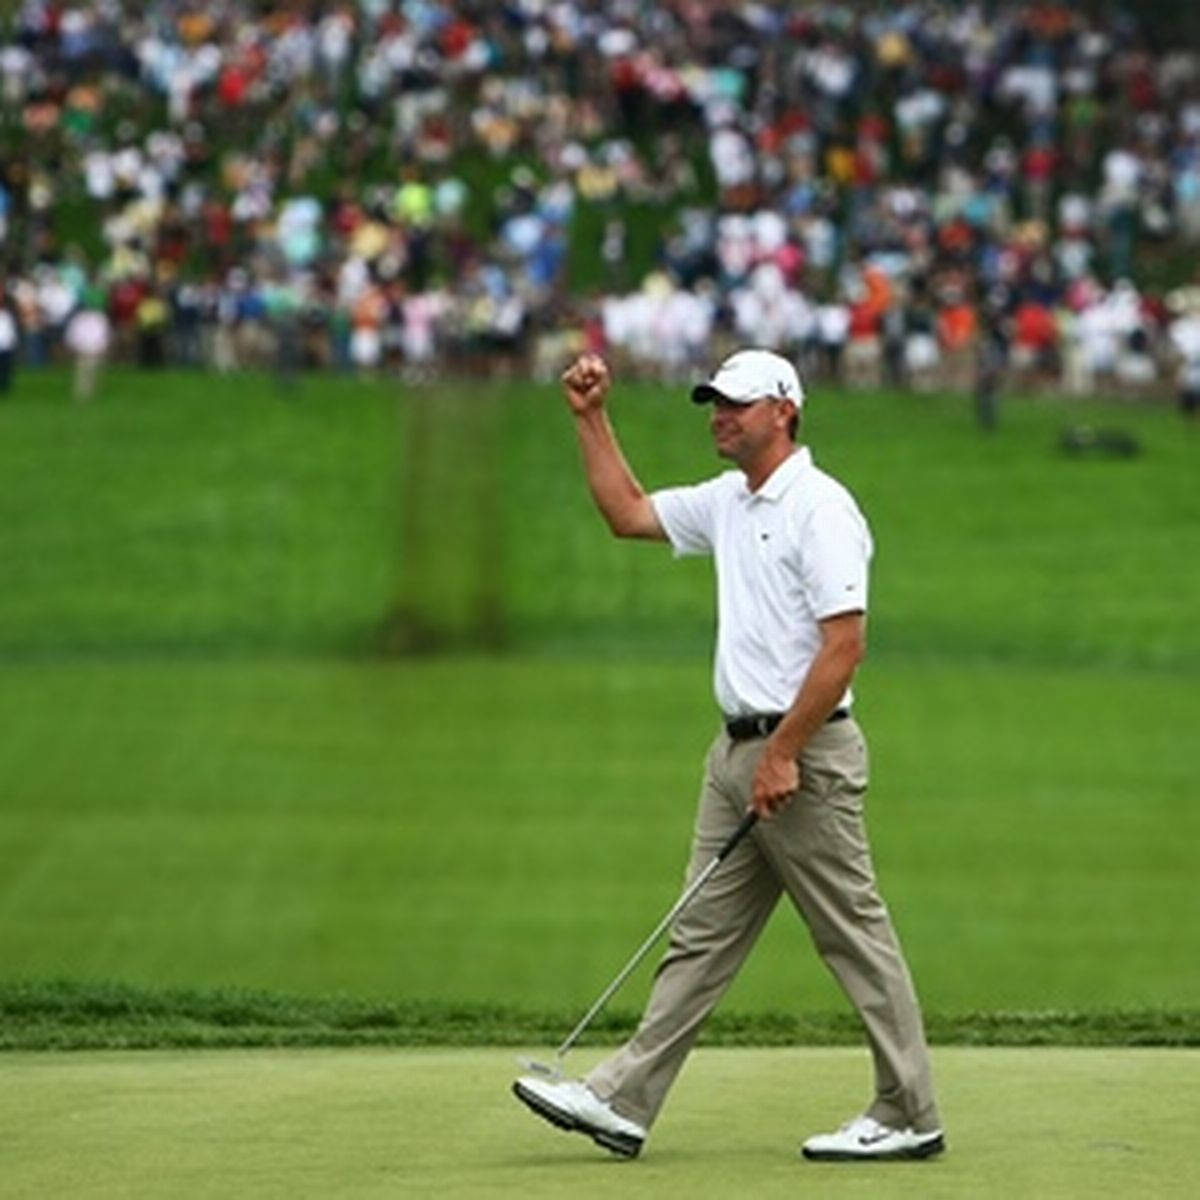 "Lucas Glover Celebrating Victory with Enthusiastic Fist Pump" Wallpaper